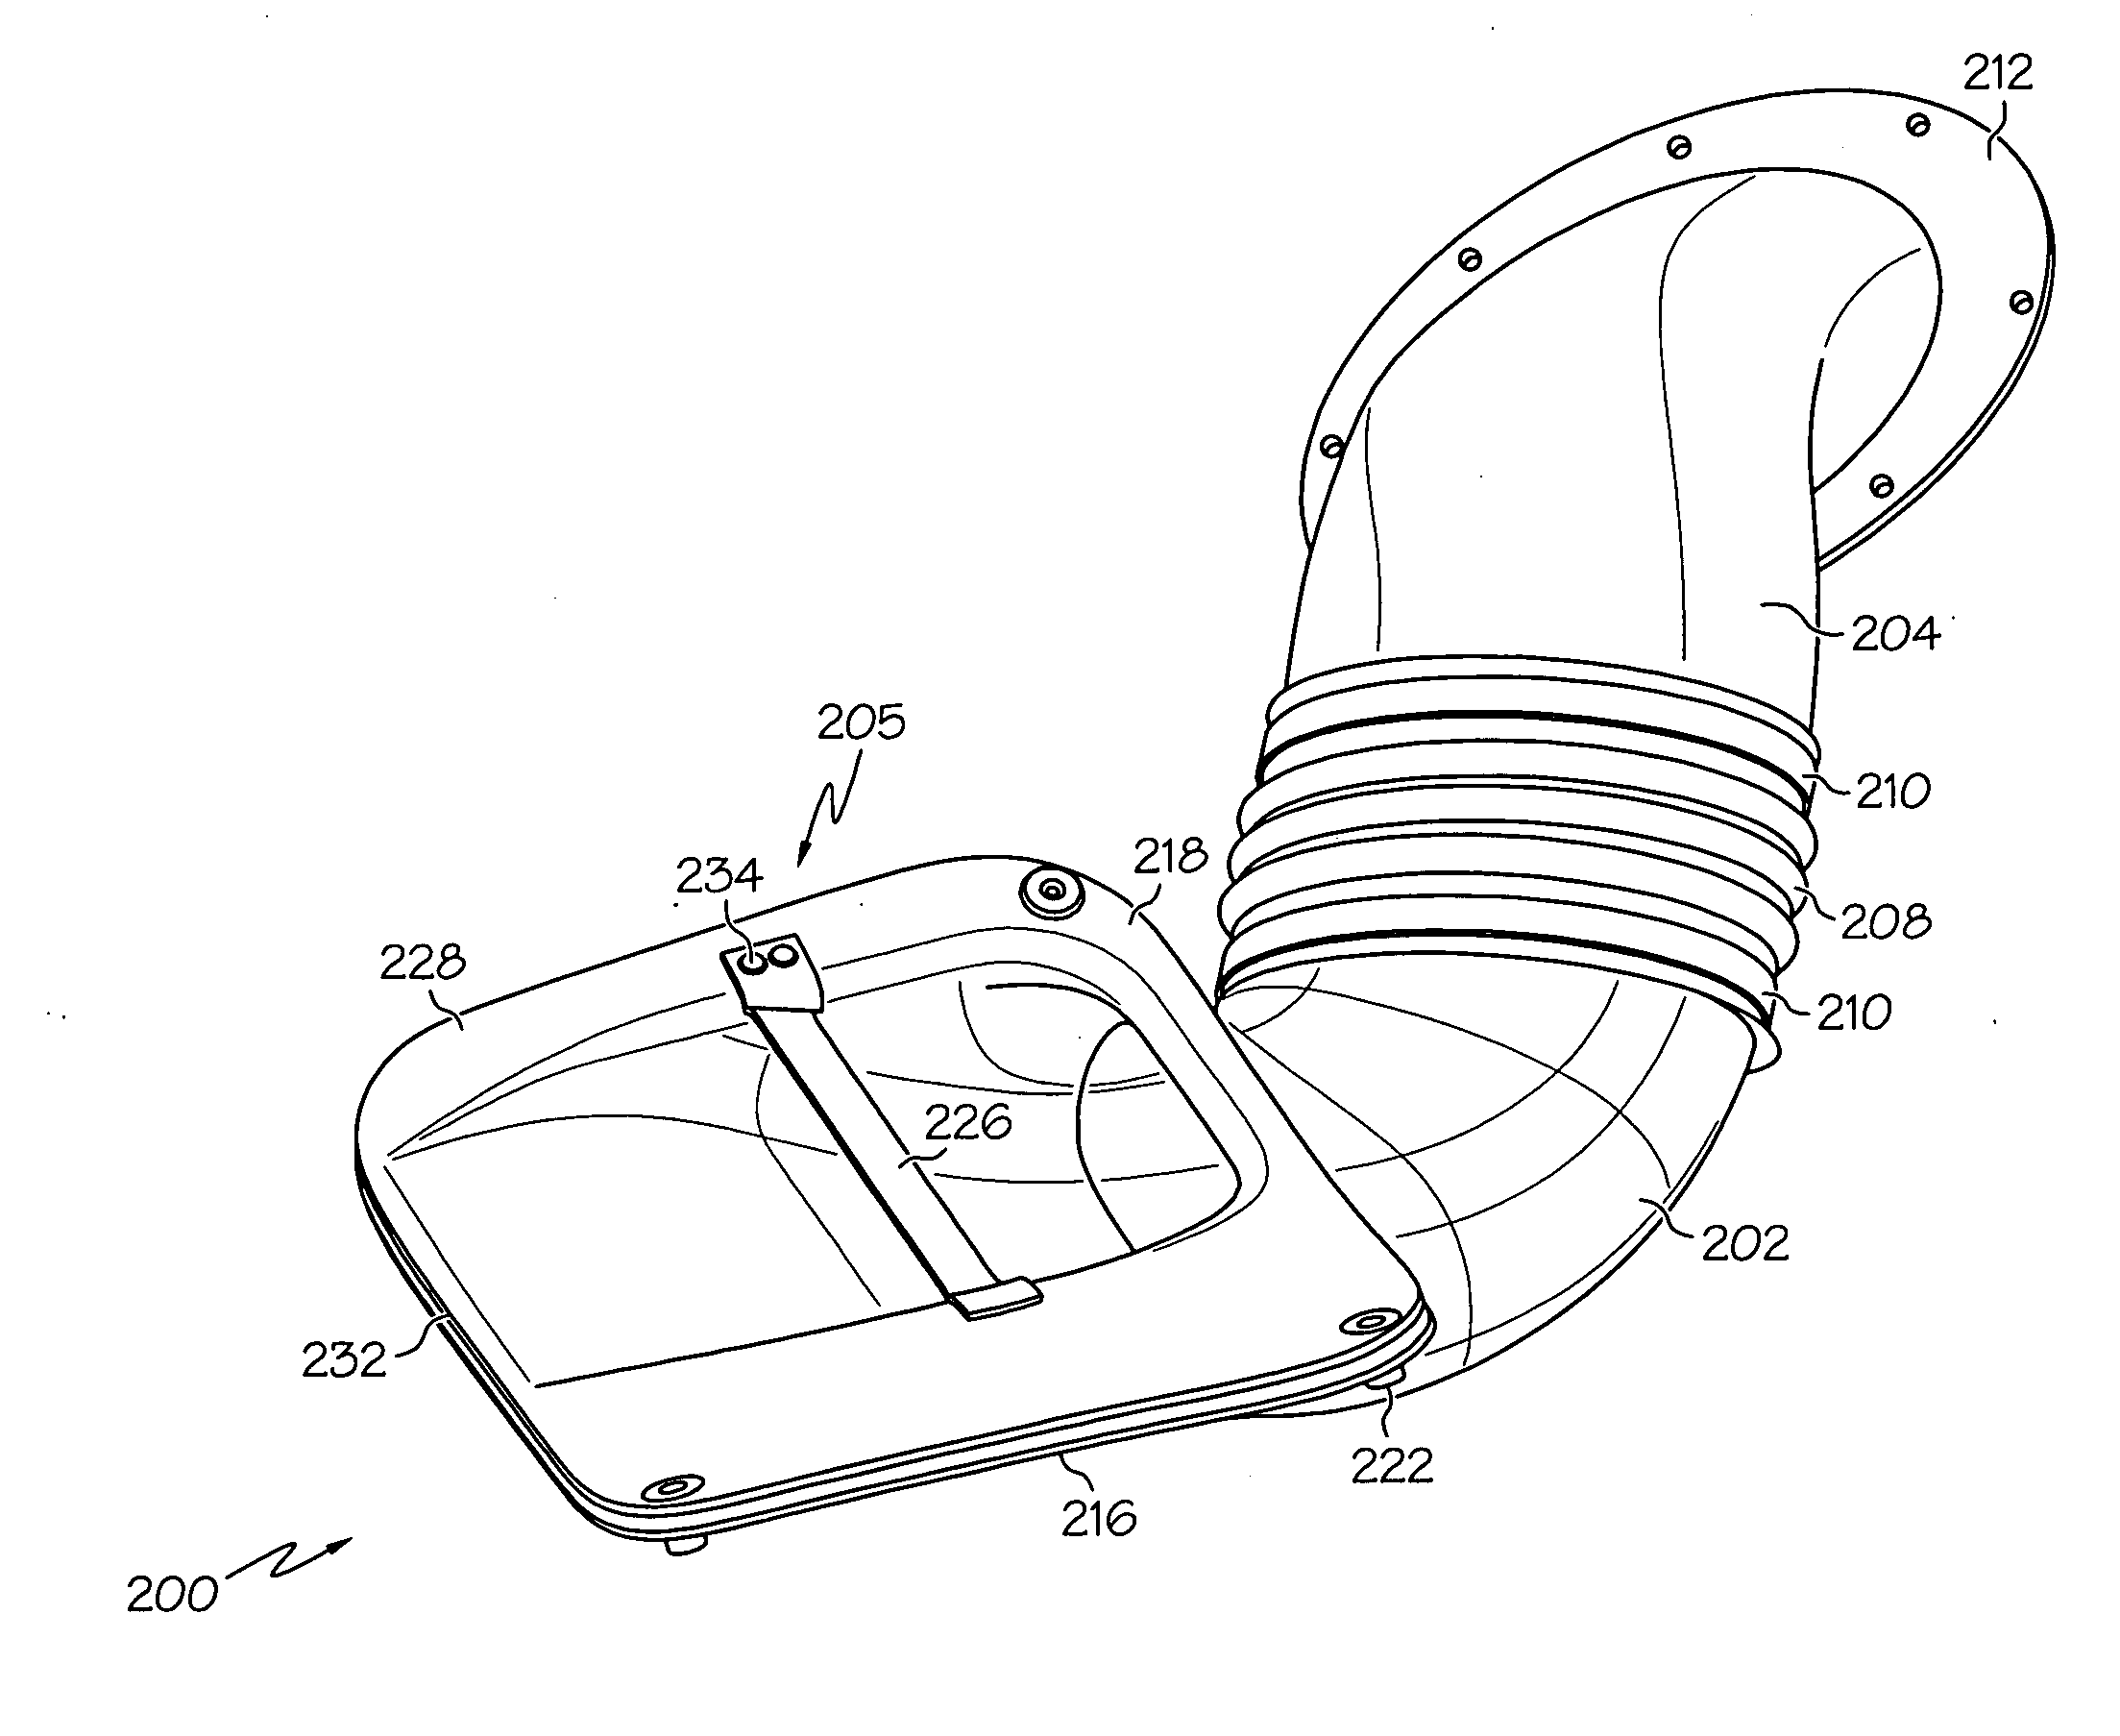 Flush inlet scoop design for aircraft bleed air system